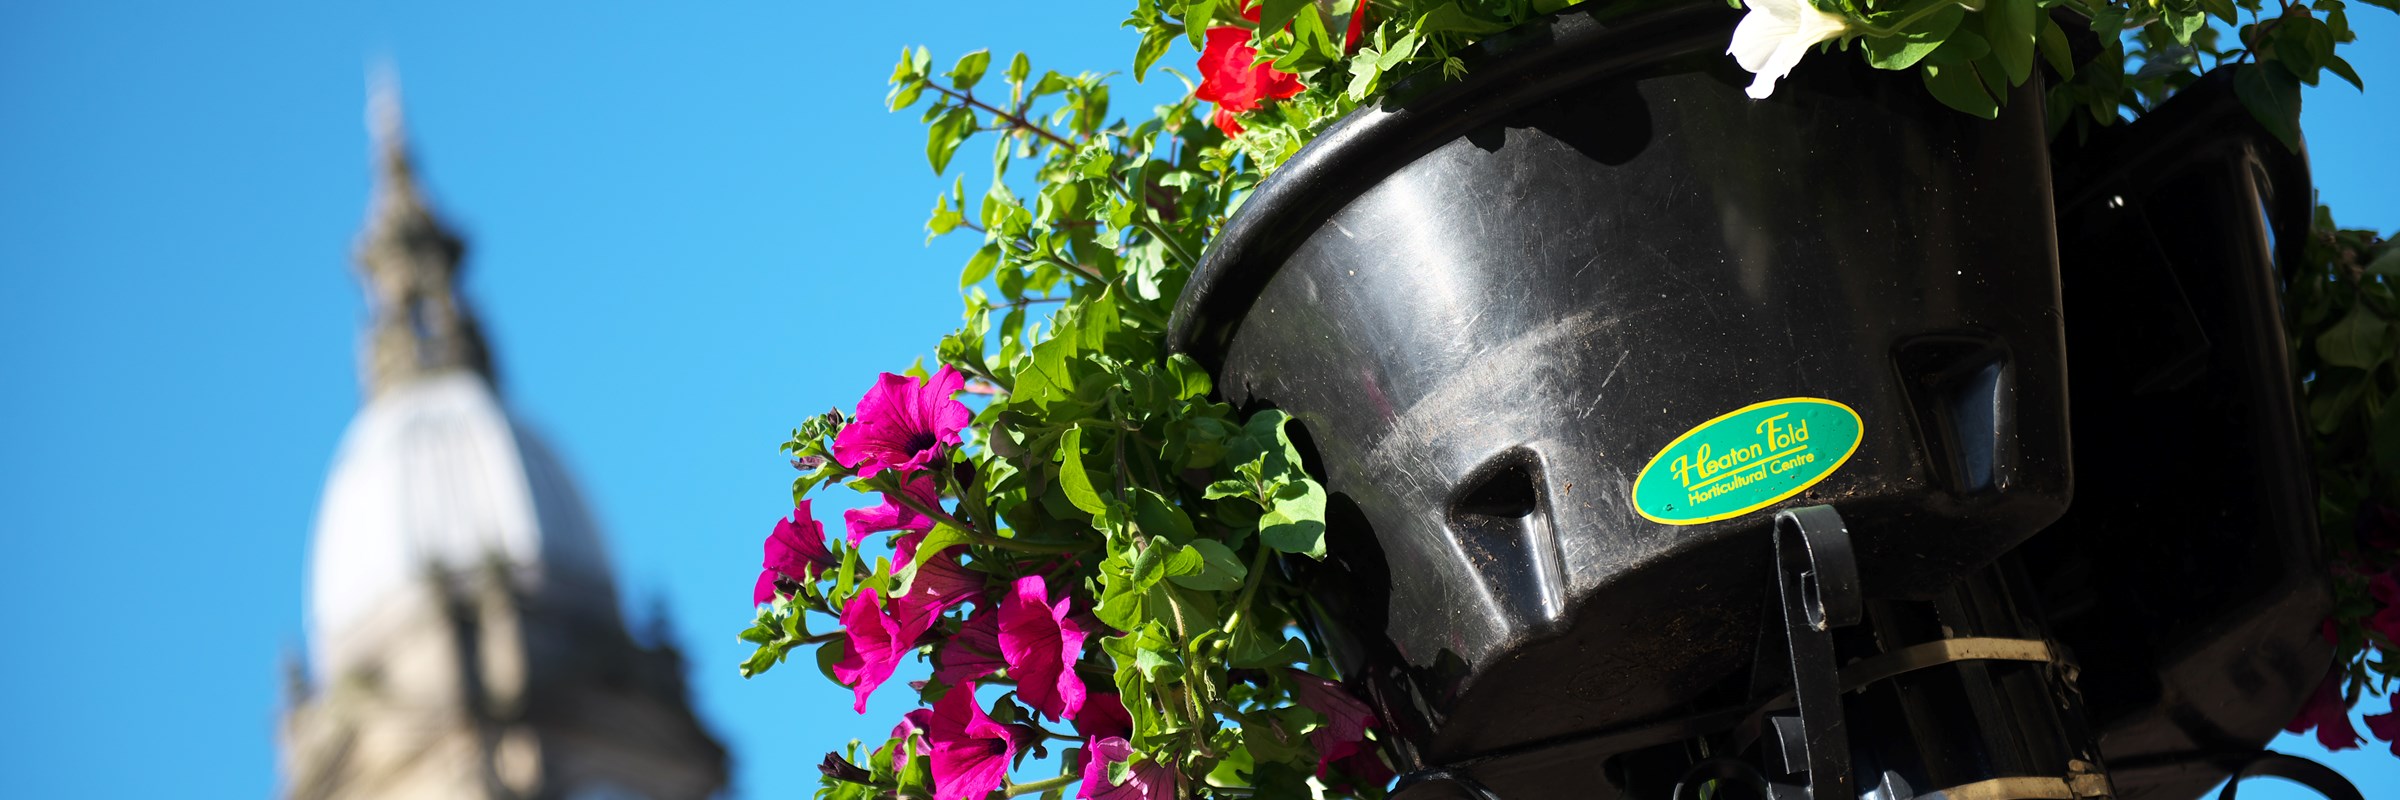 A lamp post with a pot of flowers in the foreground. In the background is a clock tower.